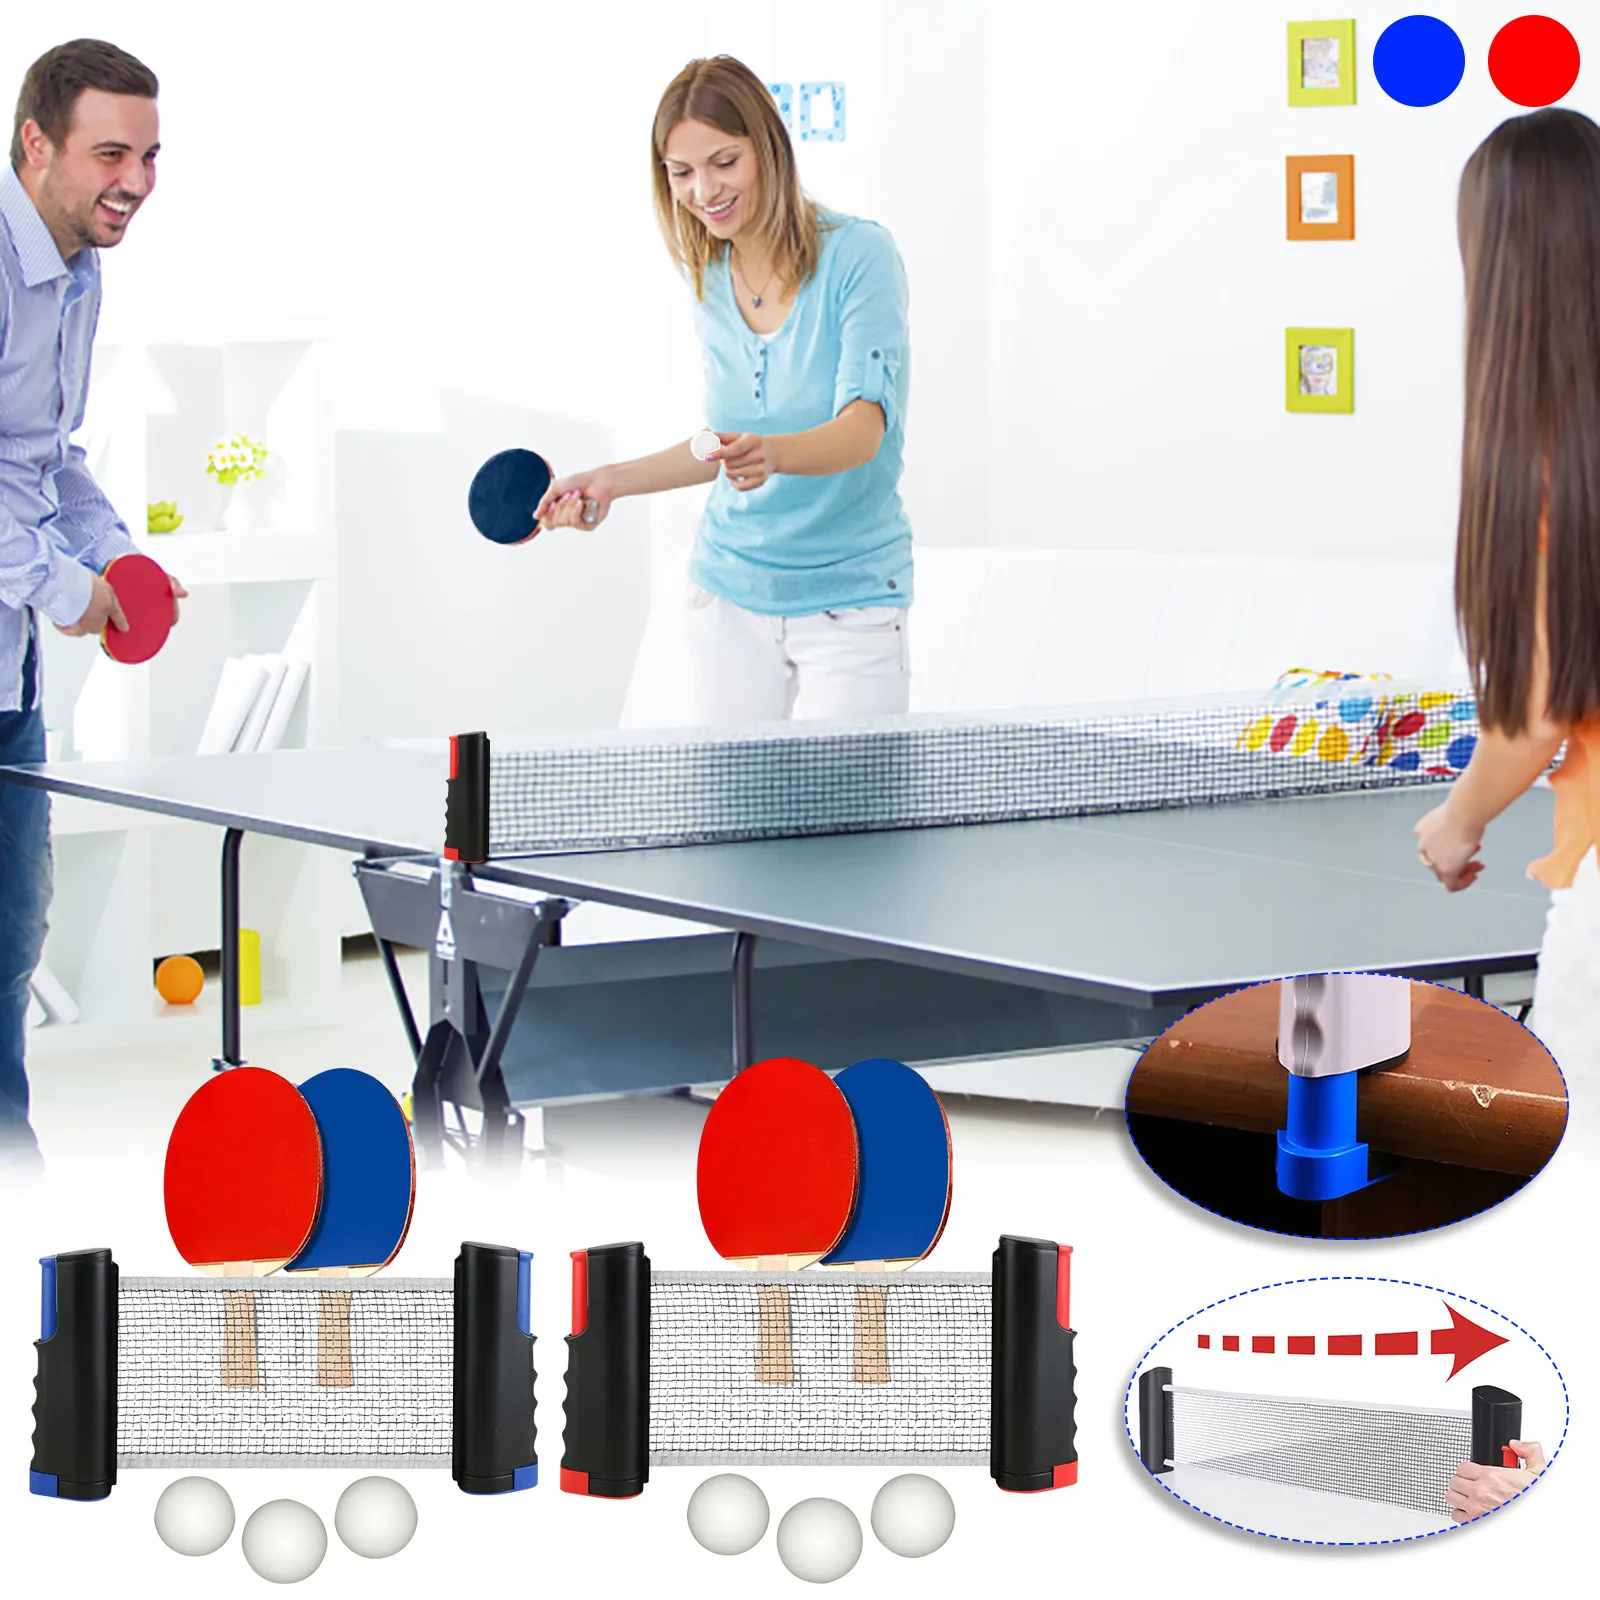 Retractable Table Tennis Ping Pong Net Portable Games Replace Net Rack Kit UK 